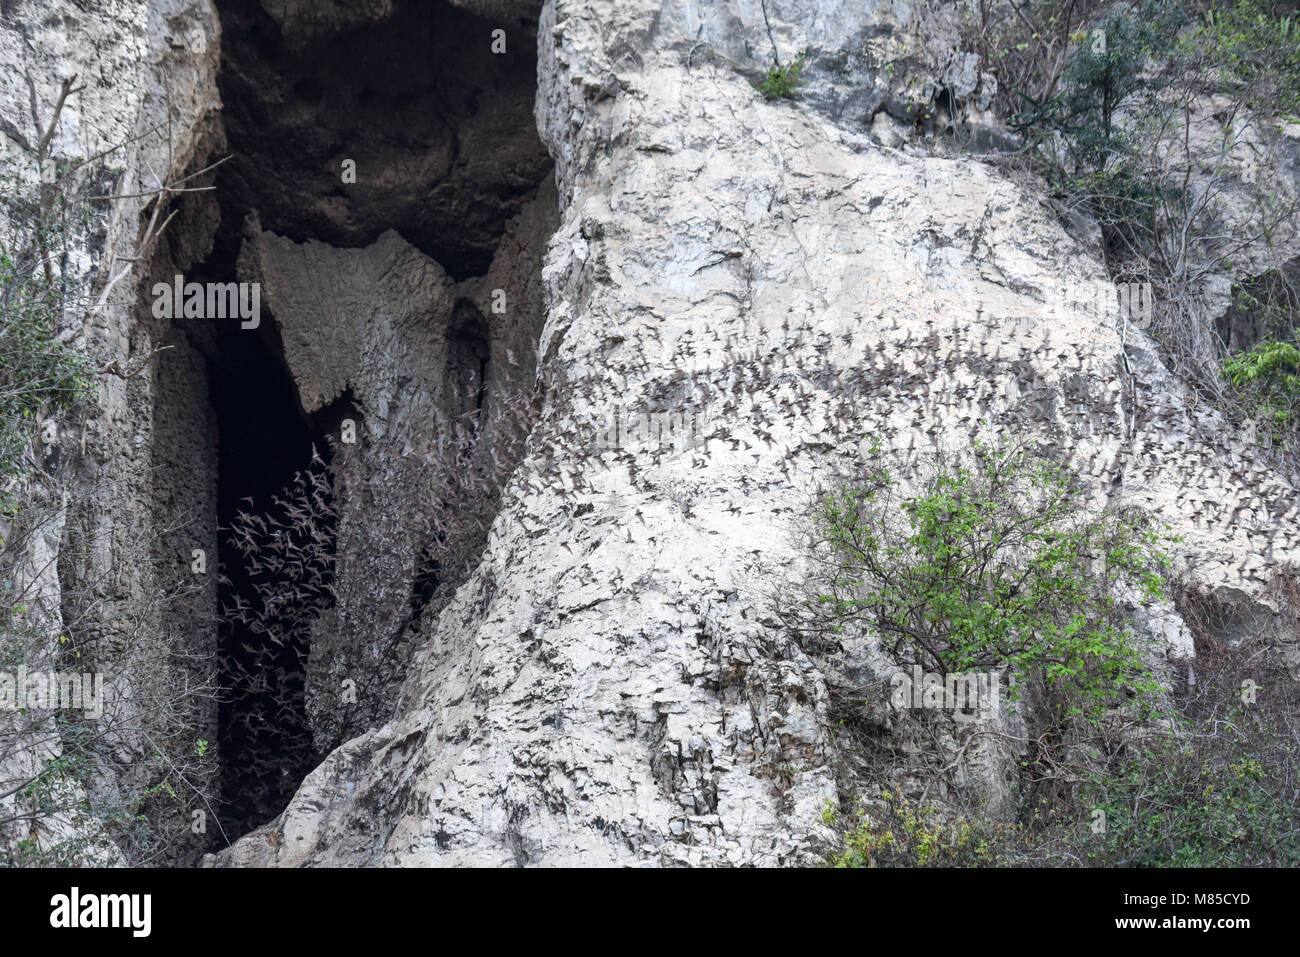 Bats flying in a row coming out of the Phnom Sempeau mountain cave at Battambang on Cambodia Stock Photo